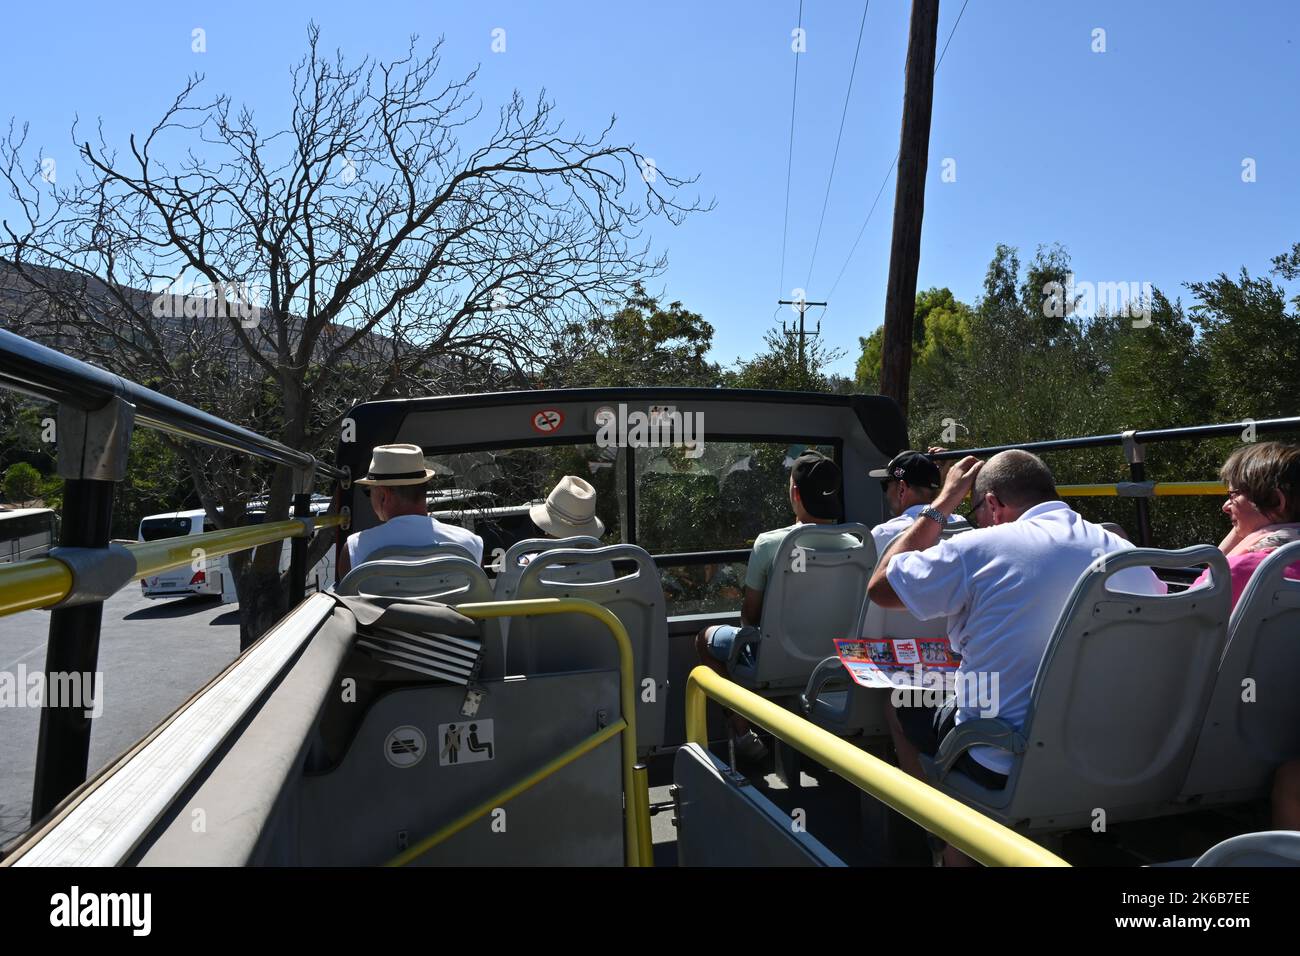 Hop on Hop off bus with tourists on the upper deck. Stock Photo